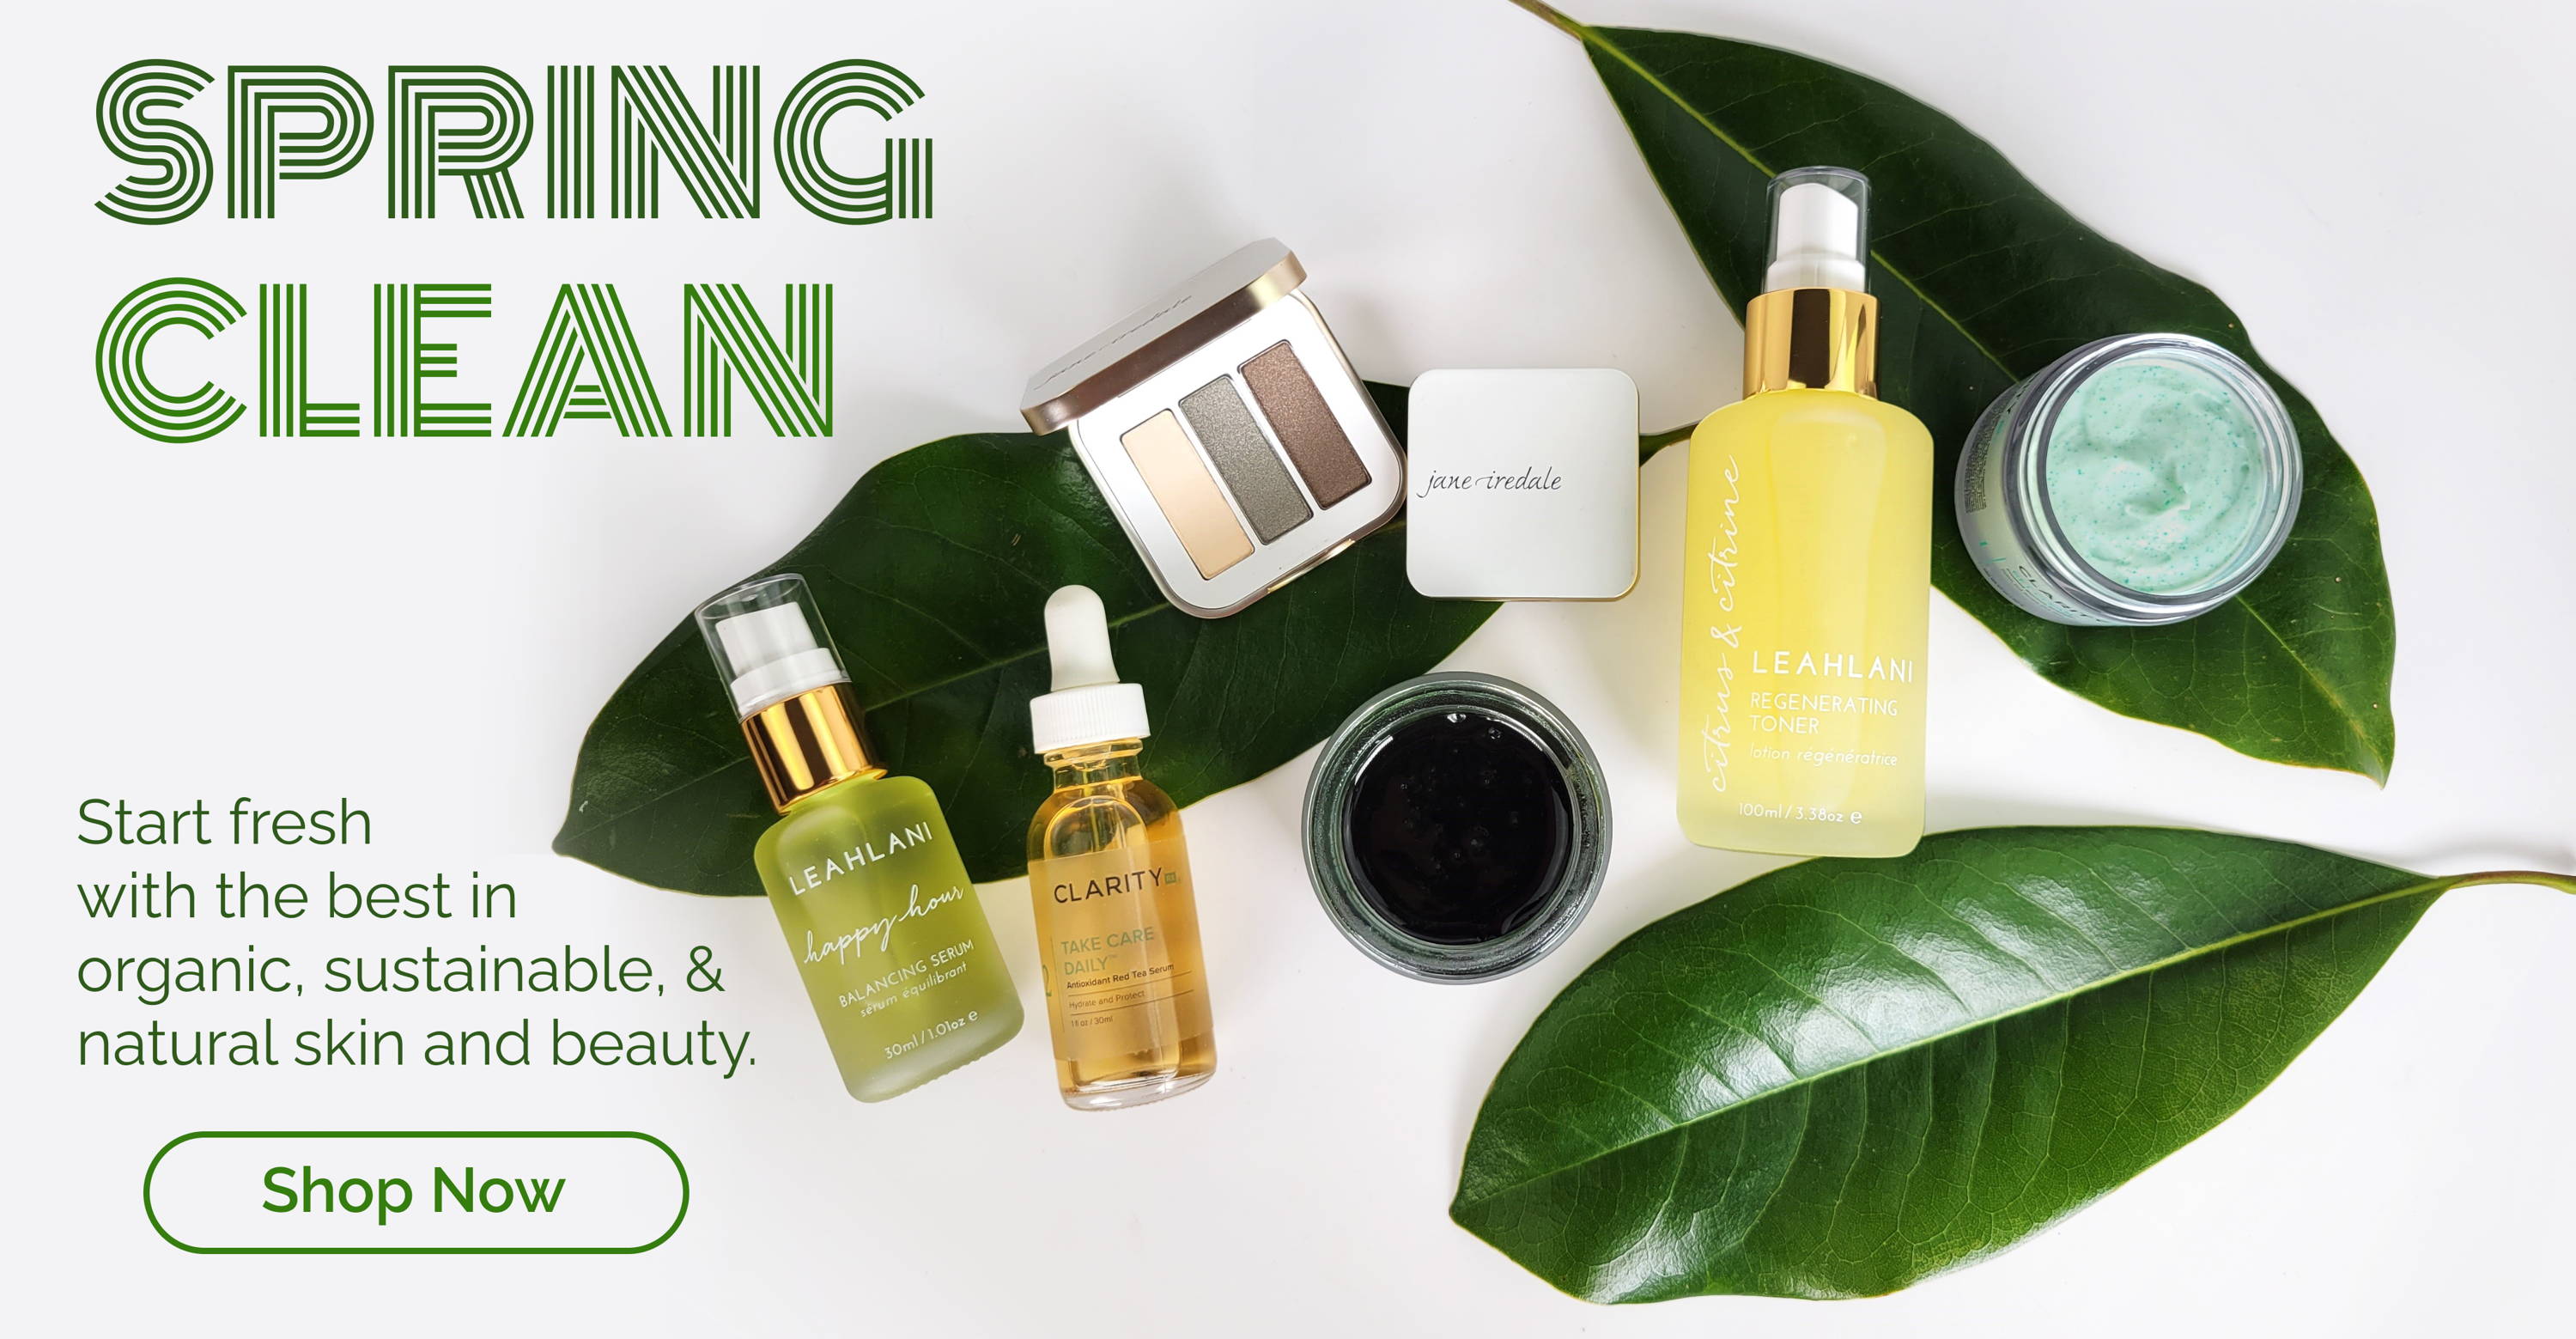 Spring Clean-- Start Fresh with the best in organic, sustainable, and natural skin and beauty. Click to shop now.